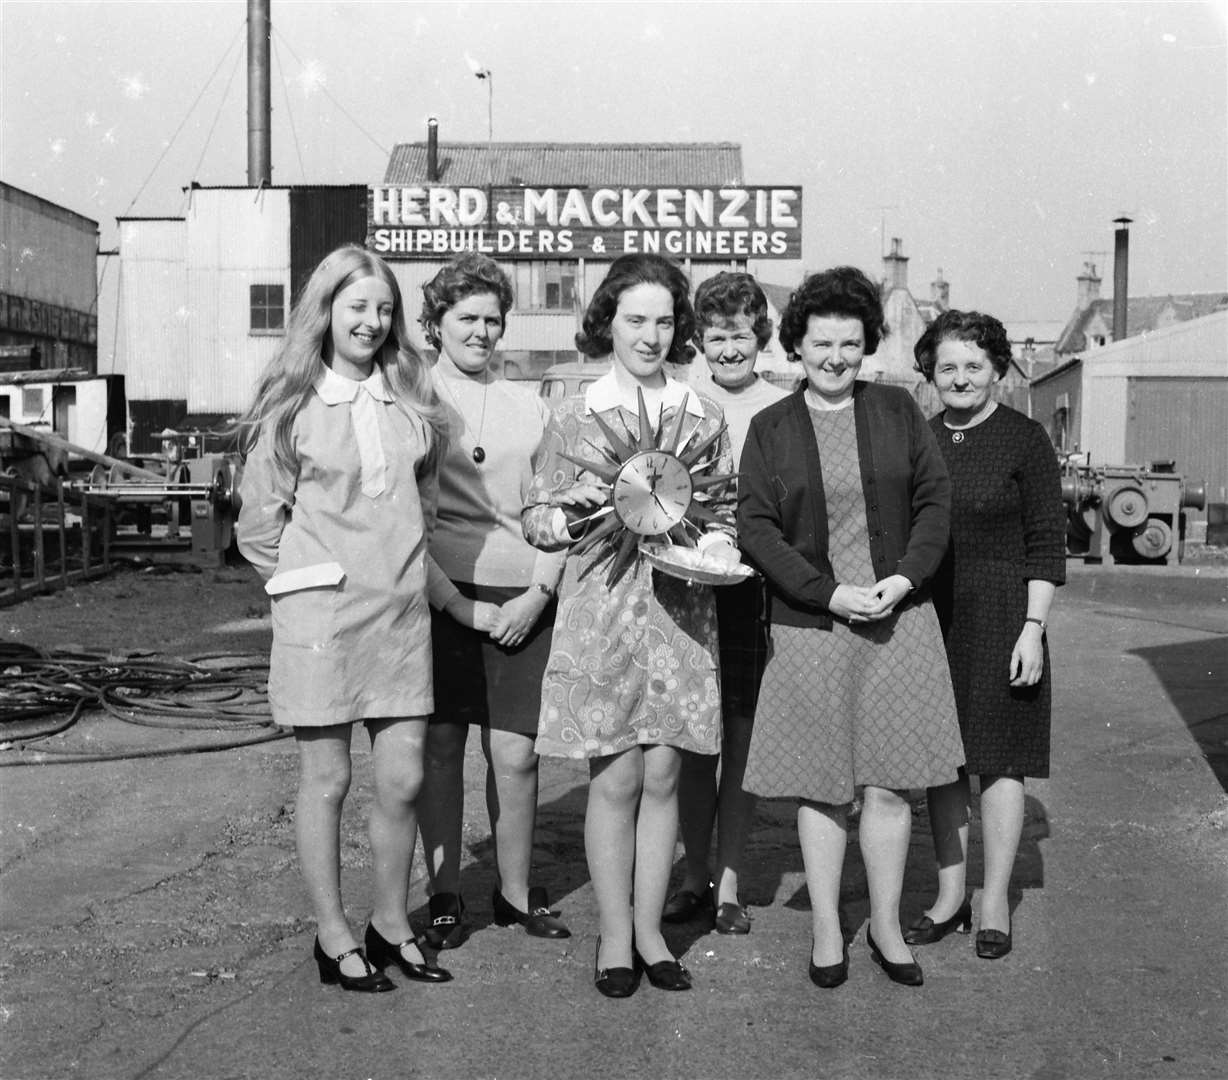 Jean McPherson receives a gift from work colleagues on the occasion of her forthcoming marriage in 1972.